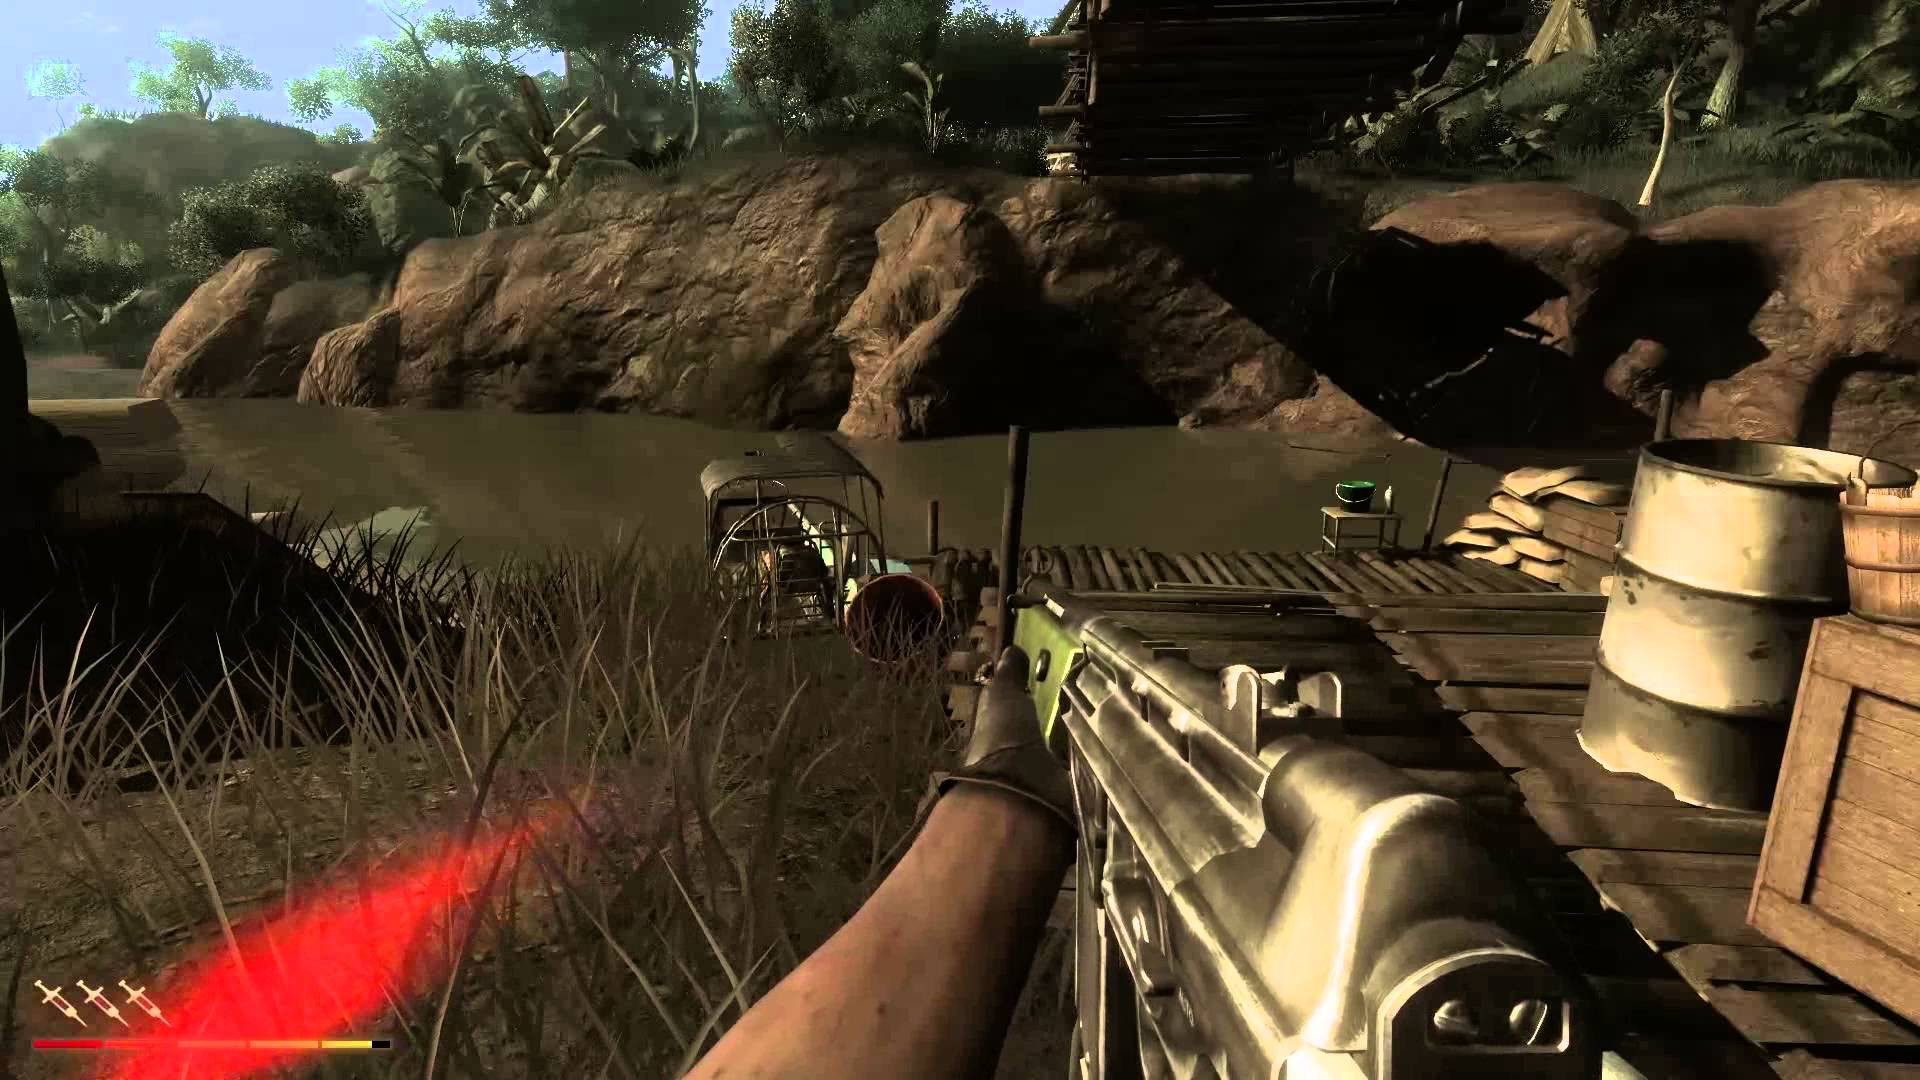 Far Cry 2: Fortune's Edition System Requirements - Can I Run It? -  PCGameBenchmark